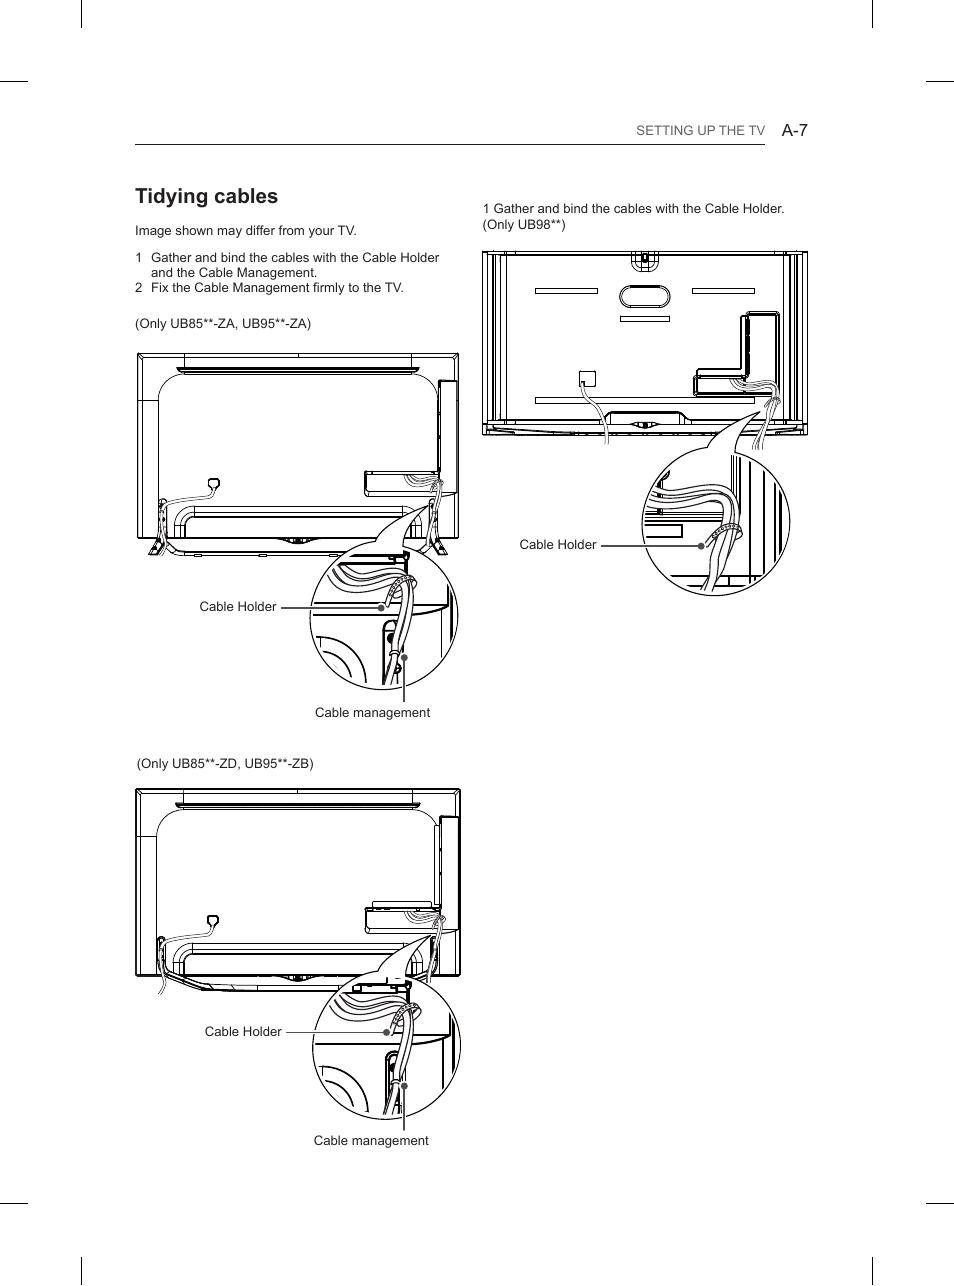 Tidying cables | LG 84UB980V User Manual | Page 7 / 332